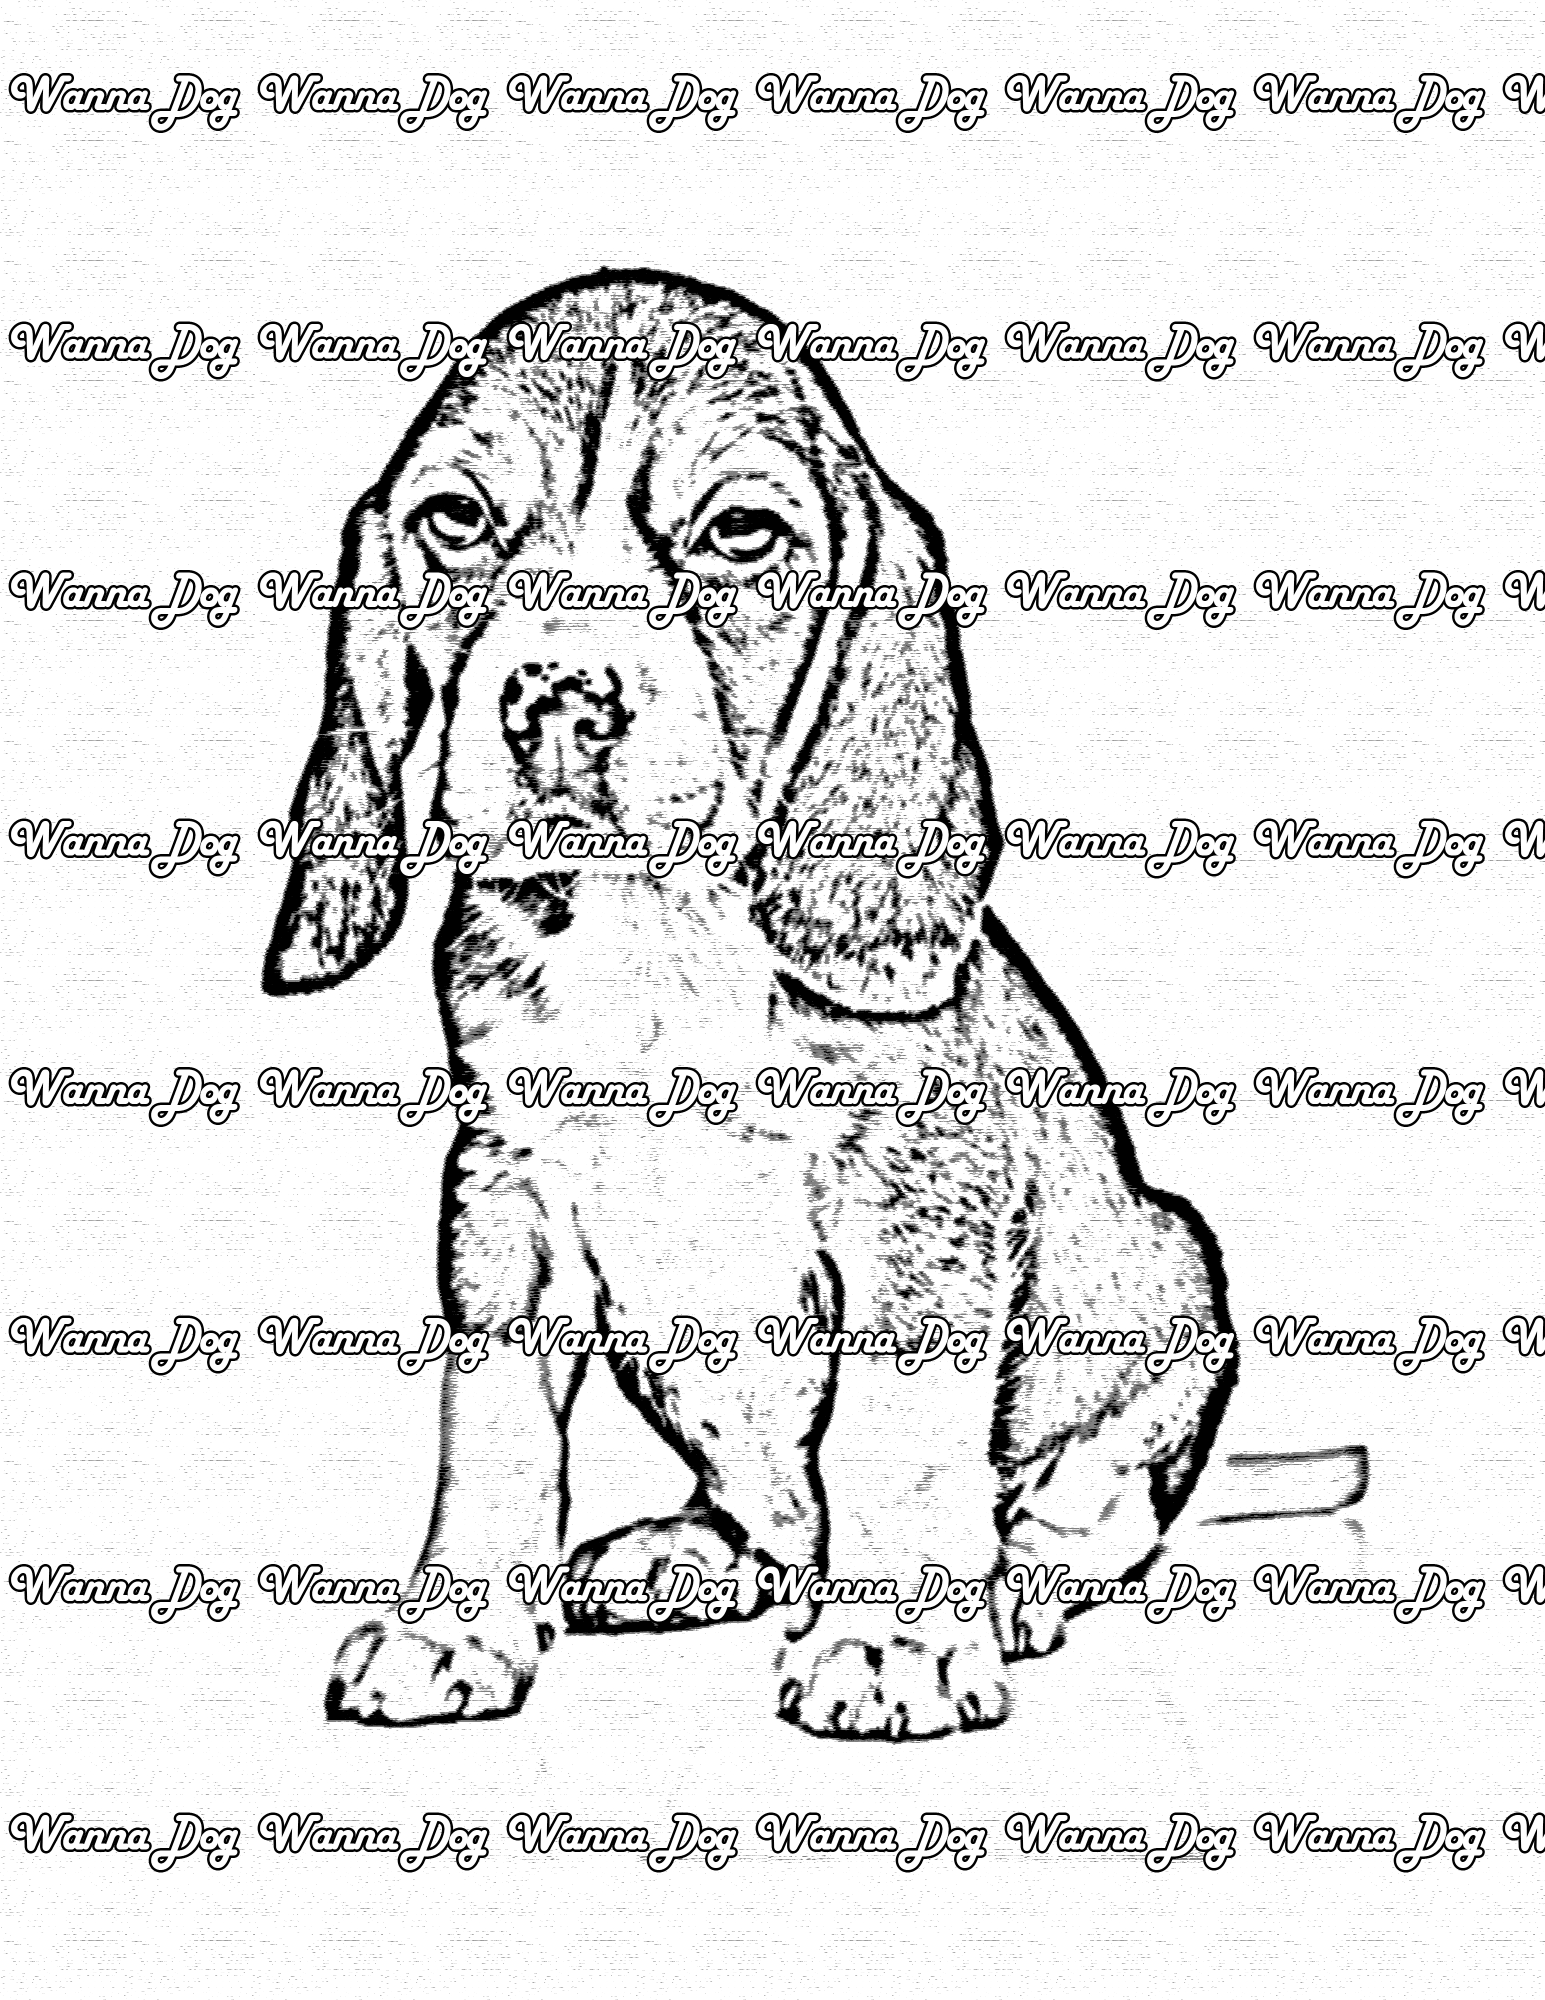 Beagle Puppy Coloring Page of a Beagle Puppy posing for the camera